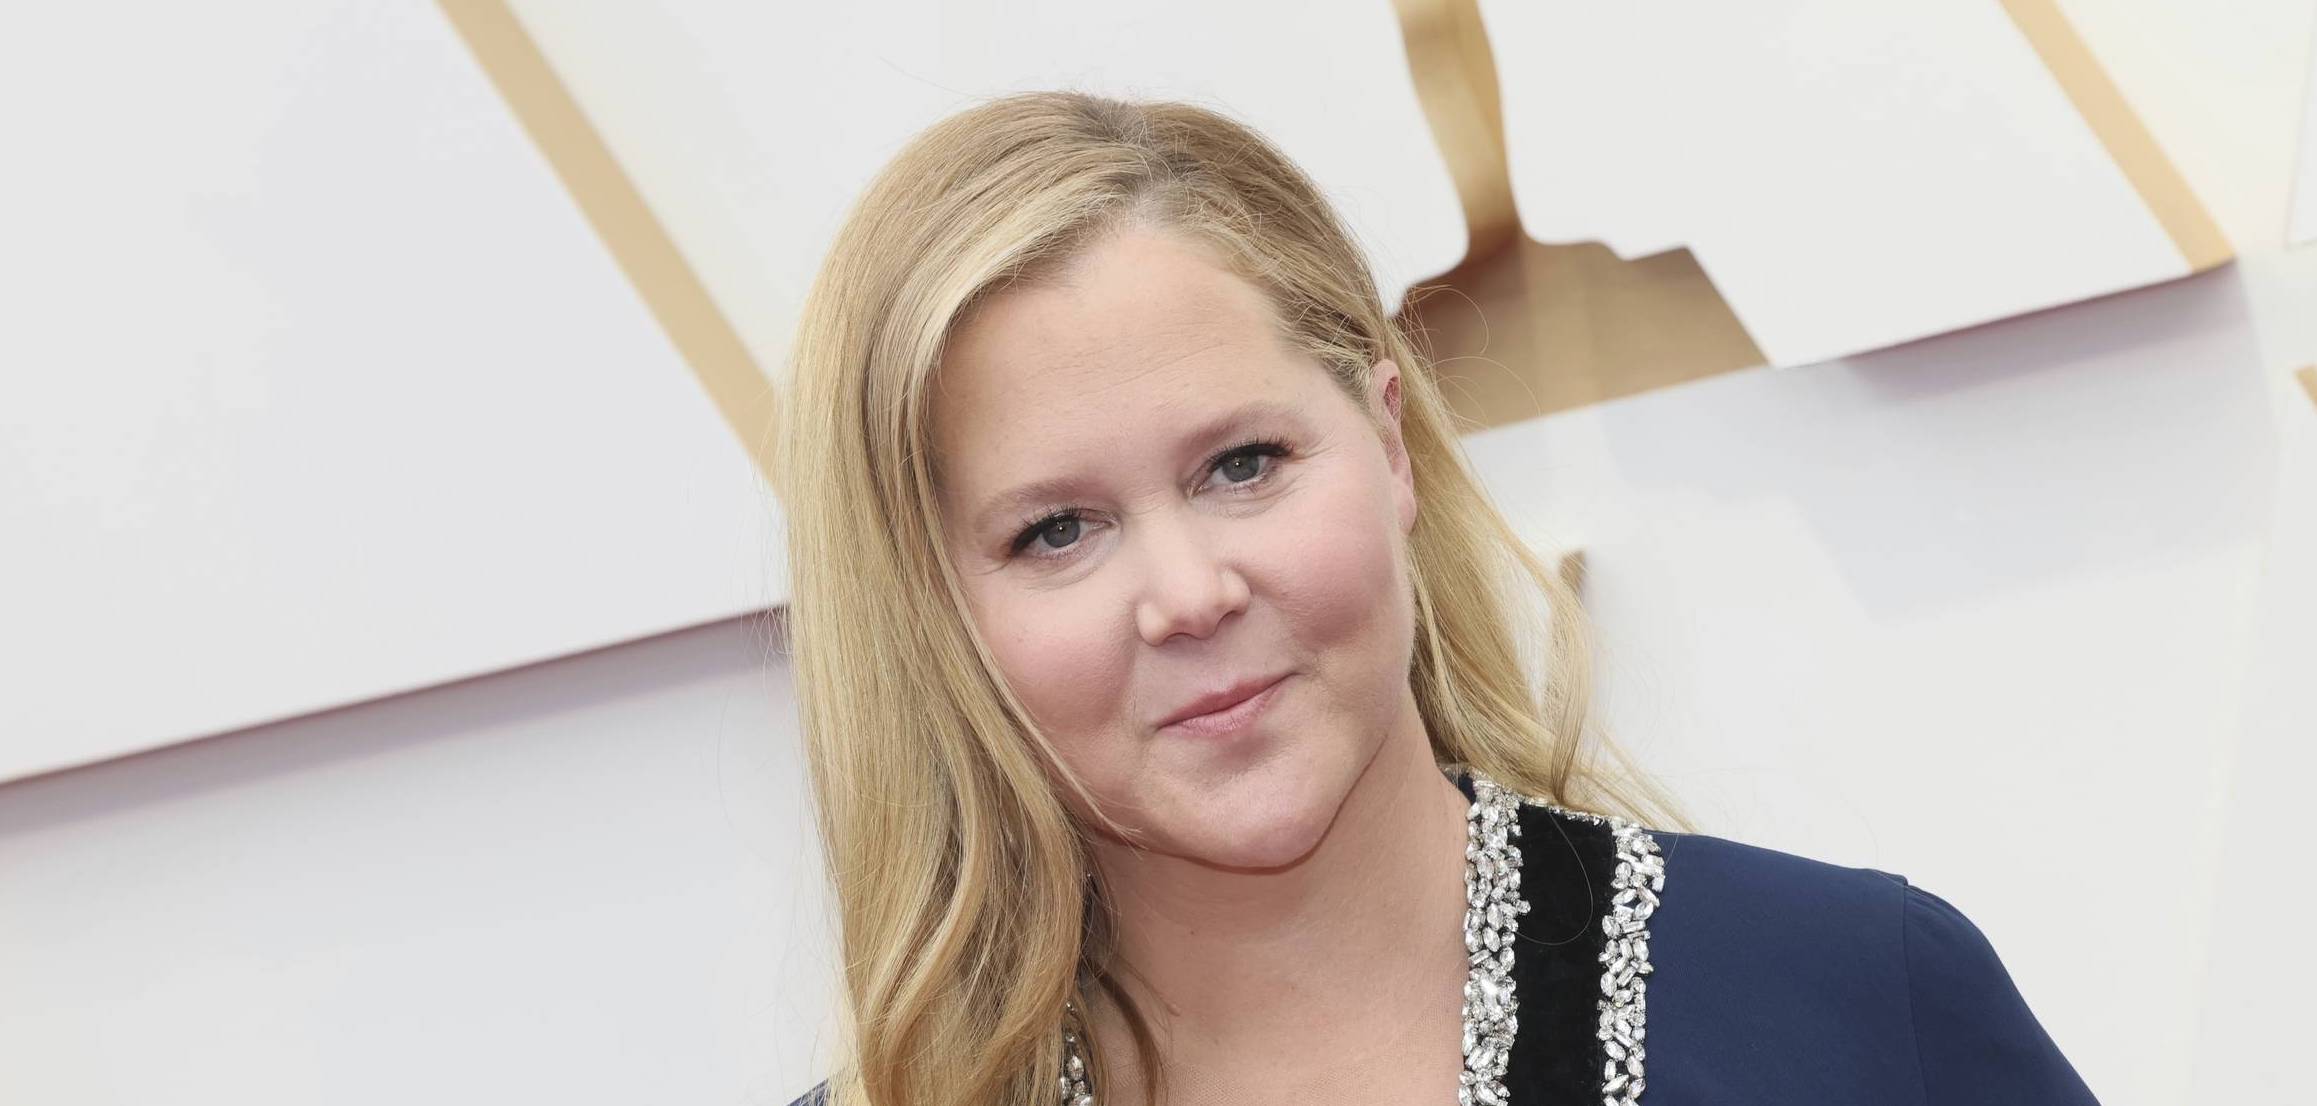 Amy Schumer’s Tour Comes To East Hampton